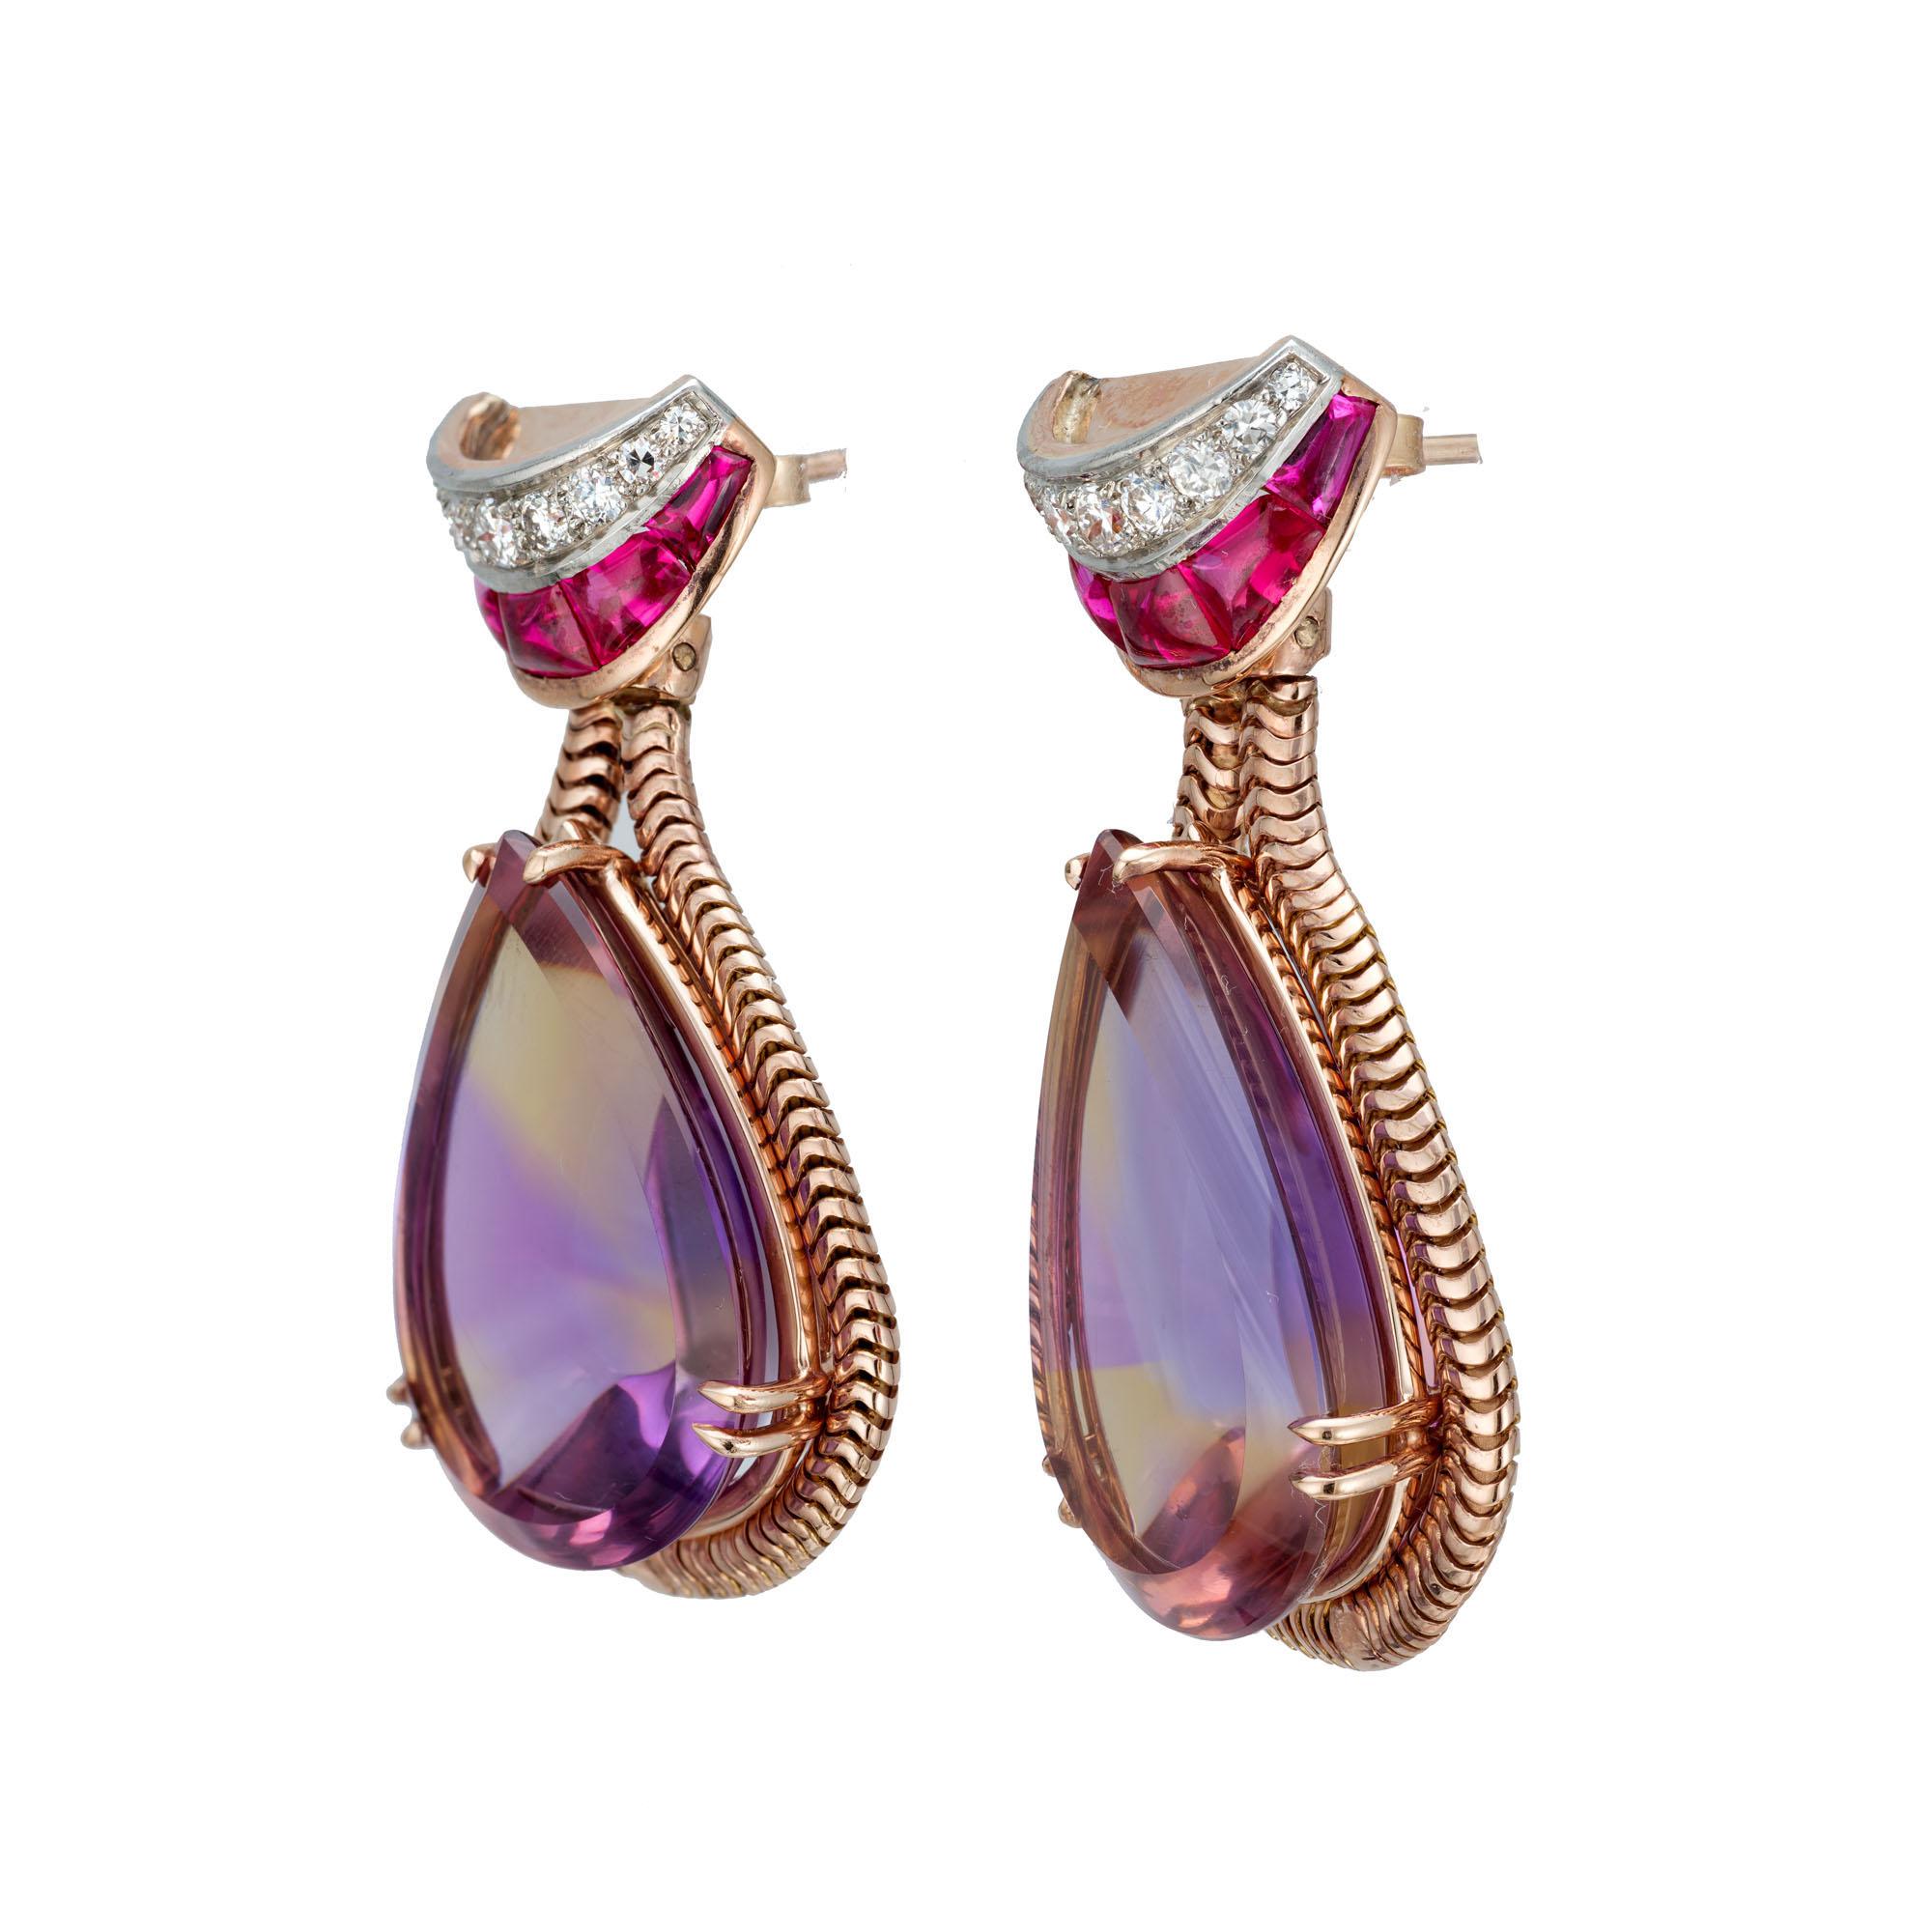 Amethyst, diamond and synthetic ruby dangle earrings. 2 pear shaped Amethyst and citrine stones set in 14k rose gold with 18 round diamonds and 10 red synthetic custom cut rubies at the top.  On Peter's now famous pink gold scale of 1 to 10 with 10